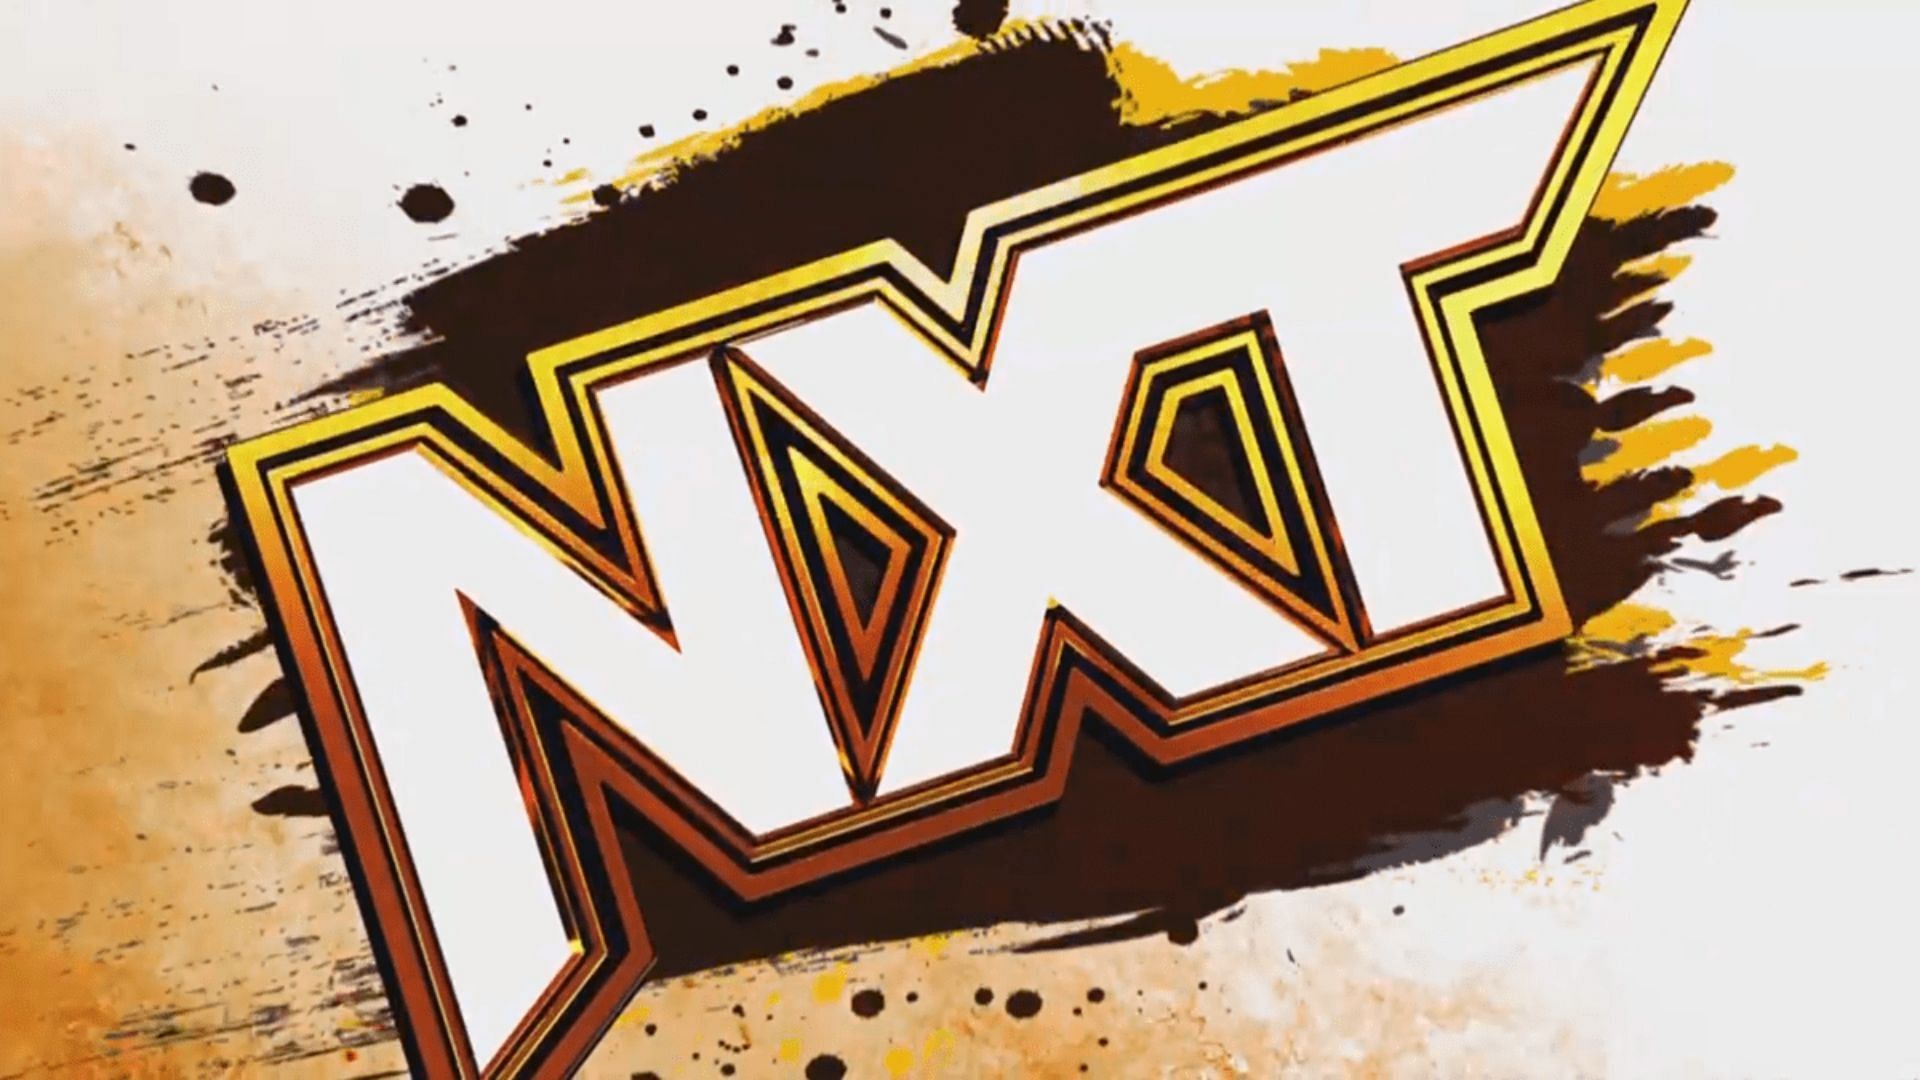 WWE NXT airs every Tuesday night on the USA Network.